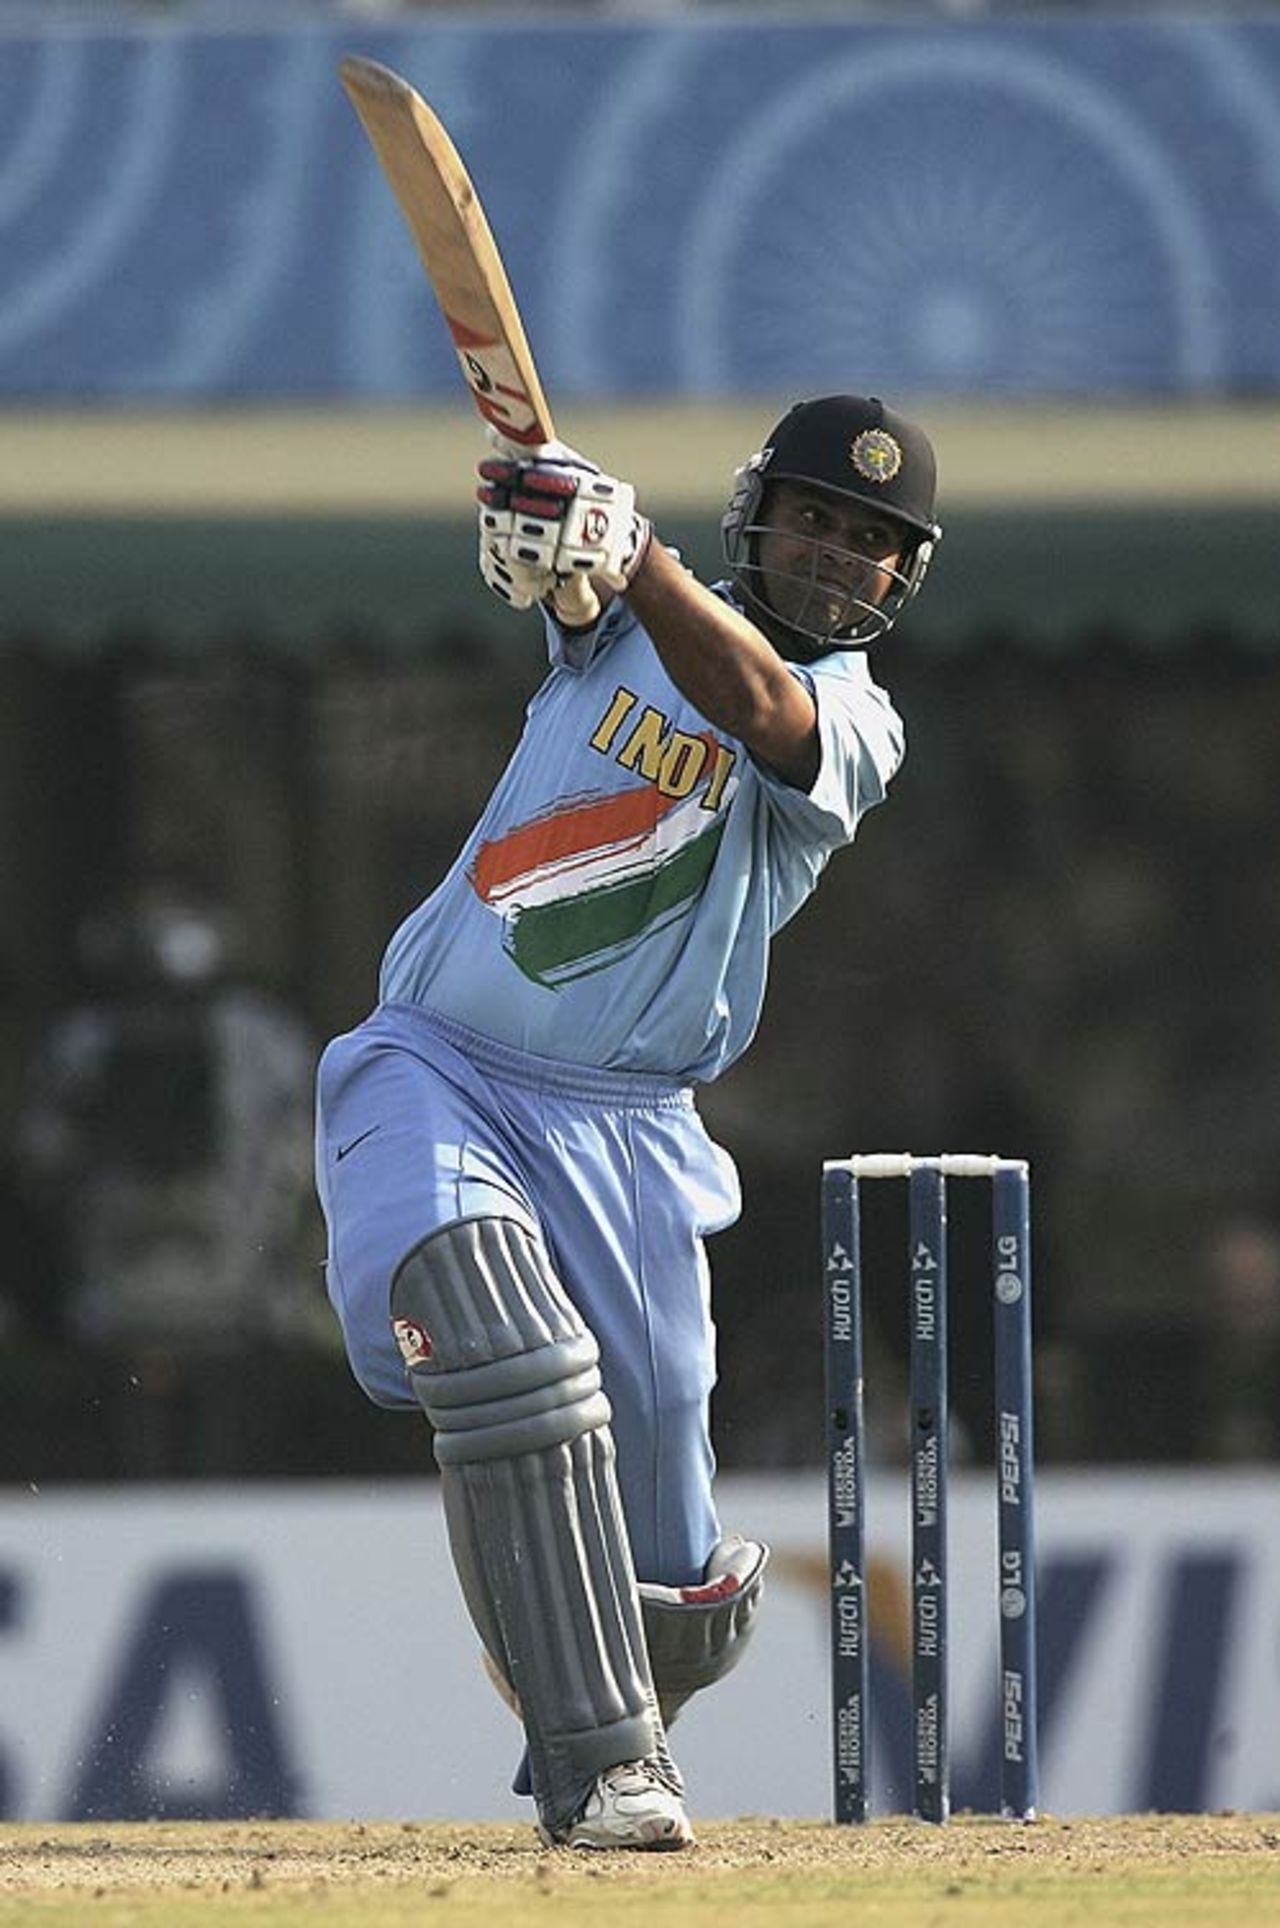 Dinesh Mongia launches one through the off side, India v Australia, 18th match, Champions Trophy, October 29, 2007